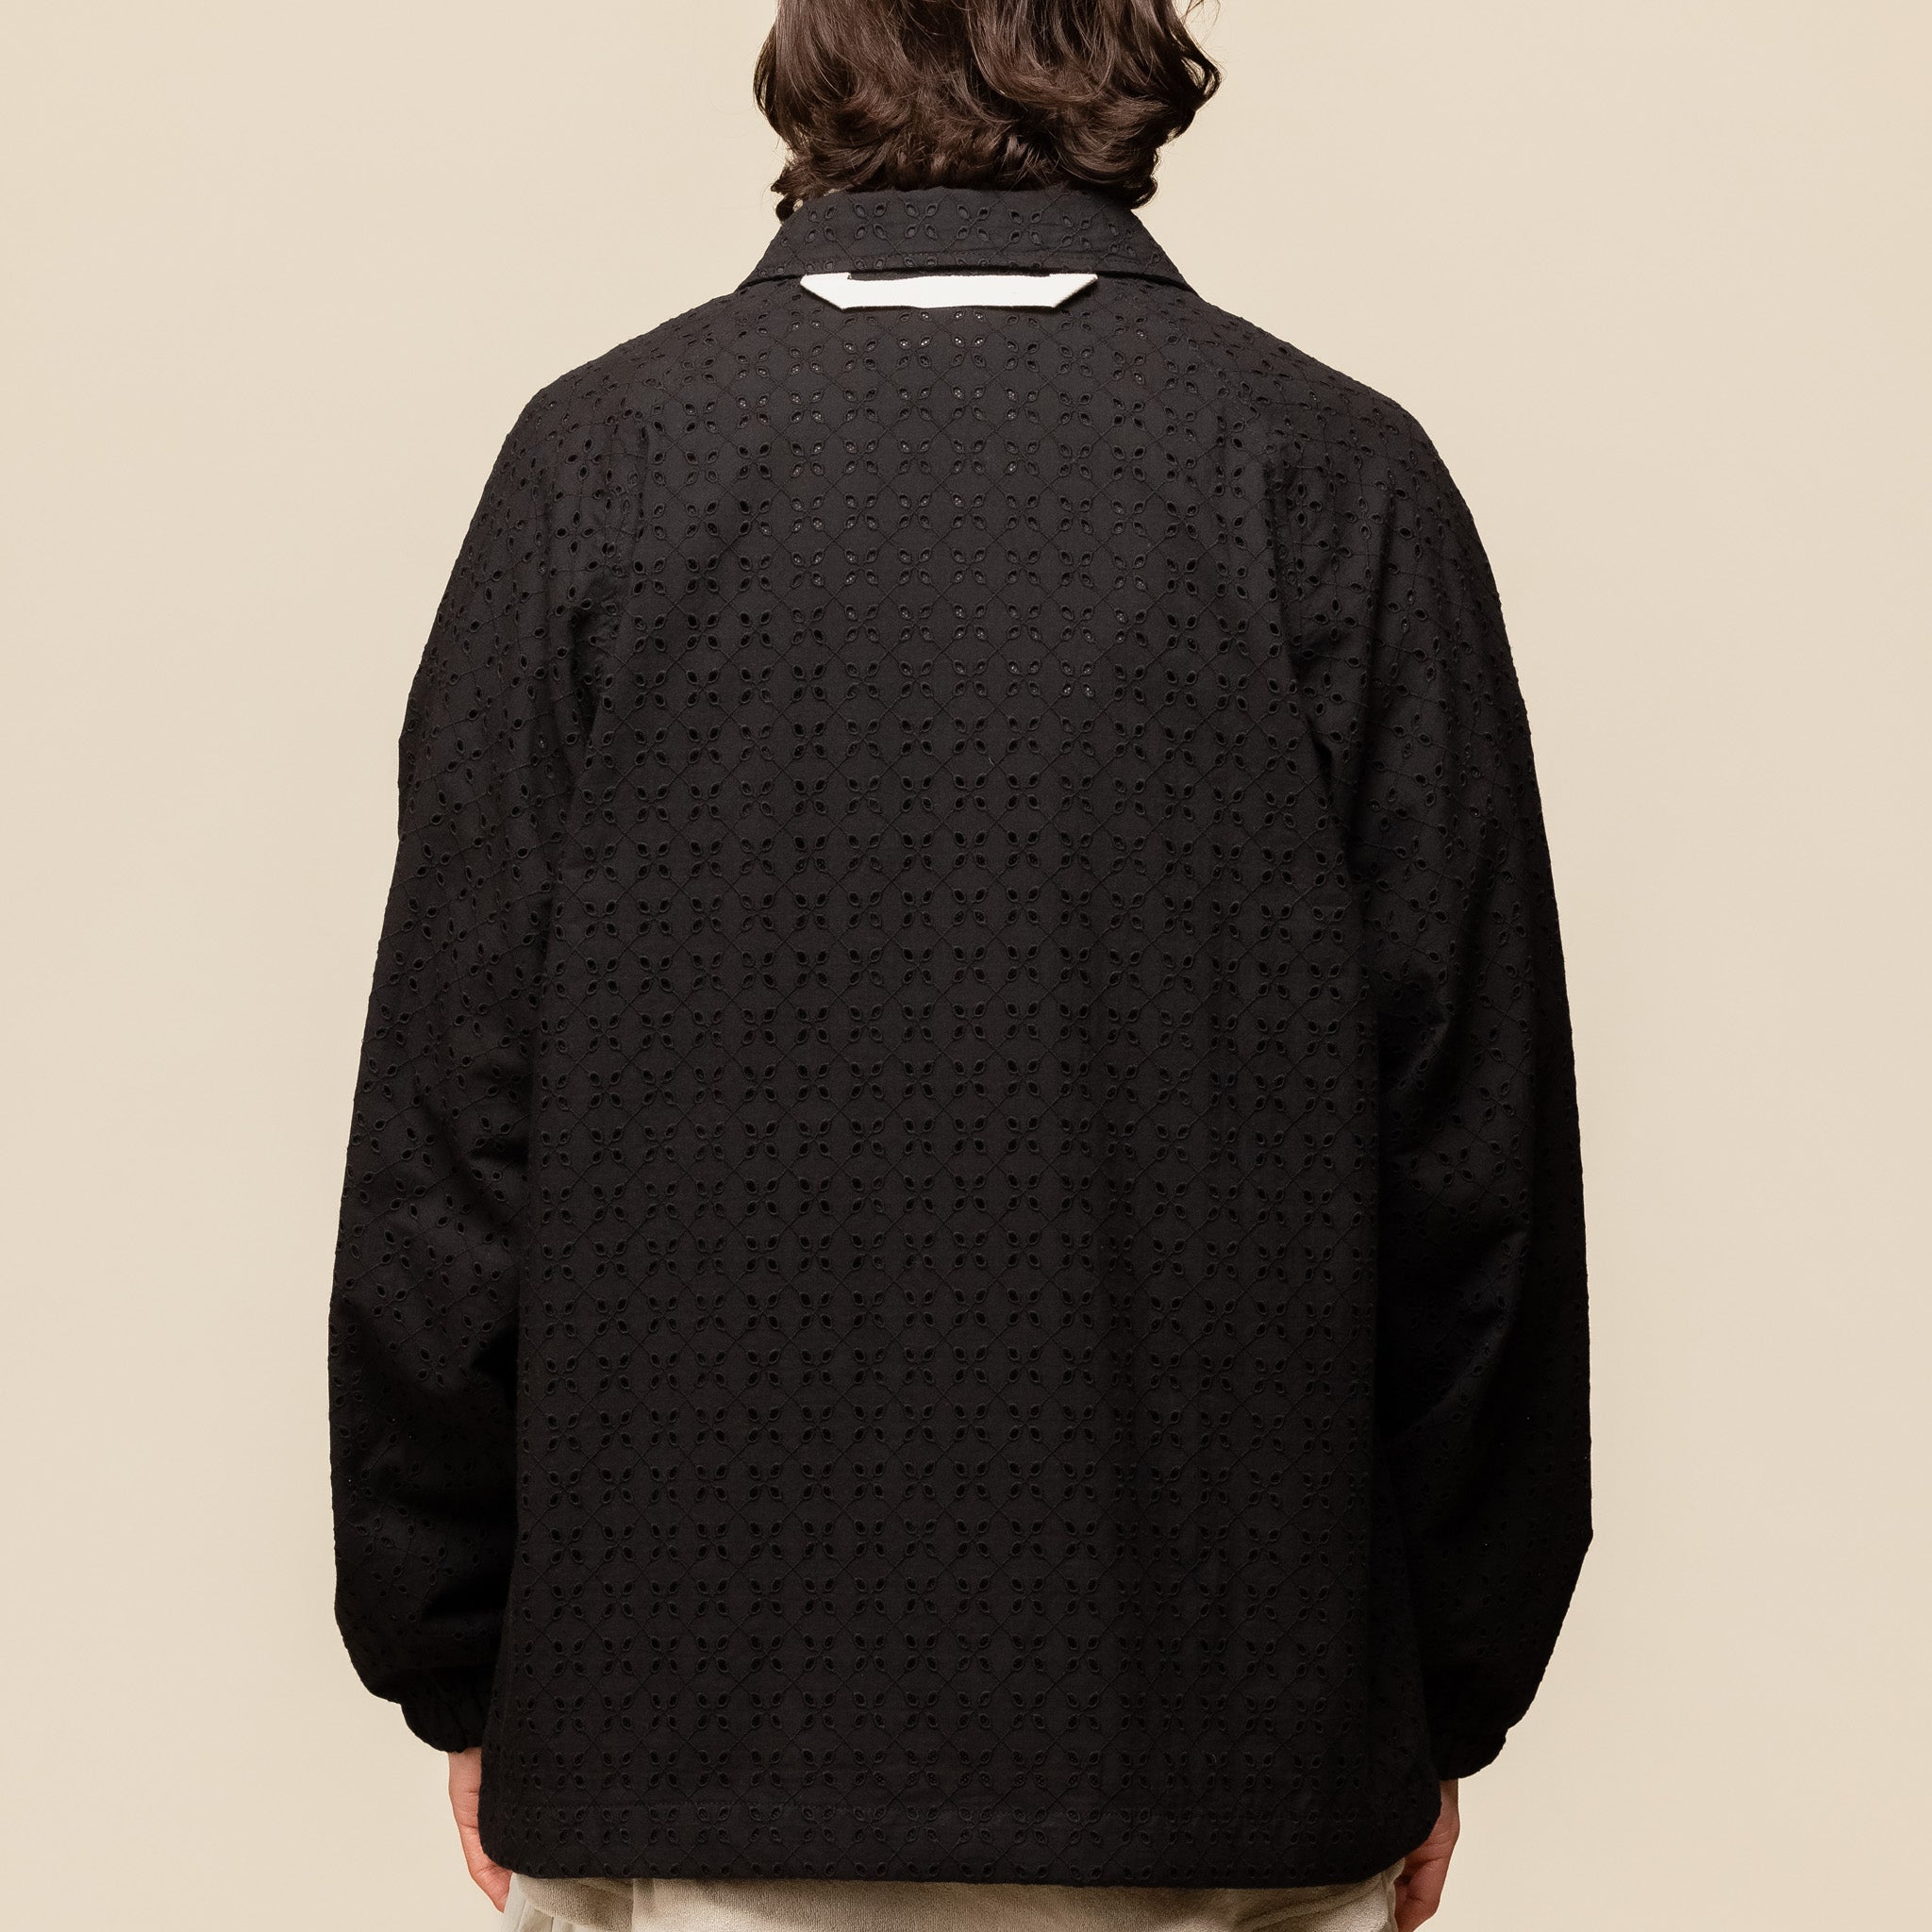 Merely Made - Premium Flower Lace Coach Jacket - Black "merely made website" "merely made stockists"